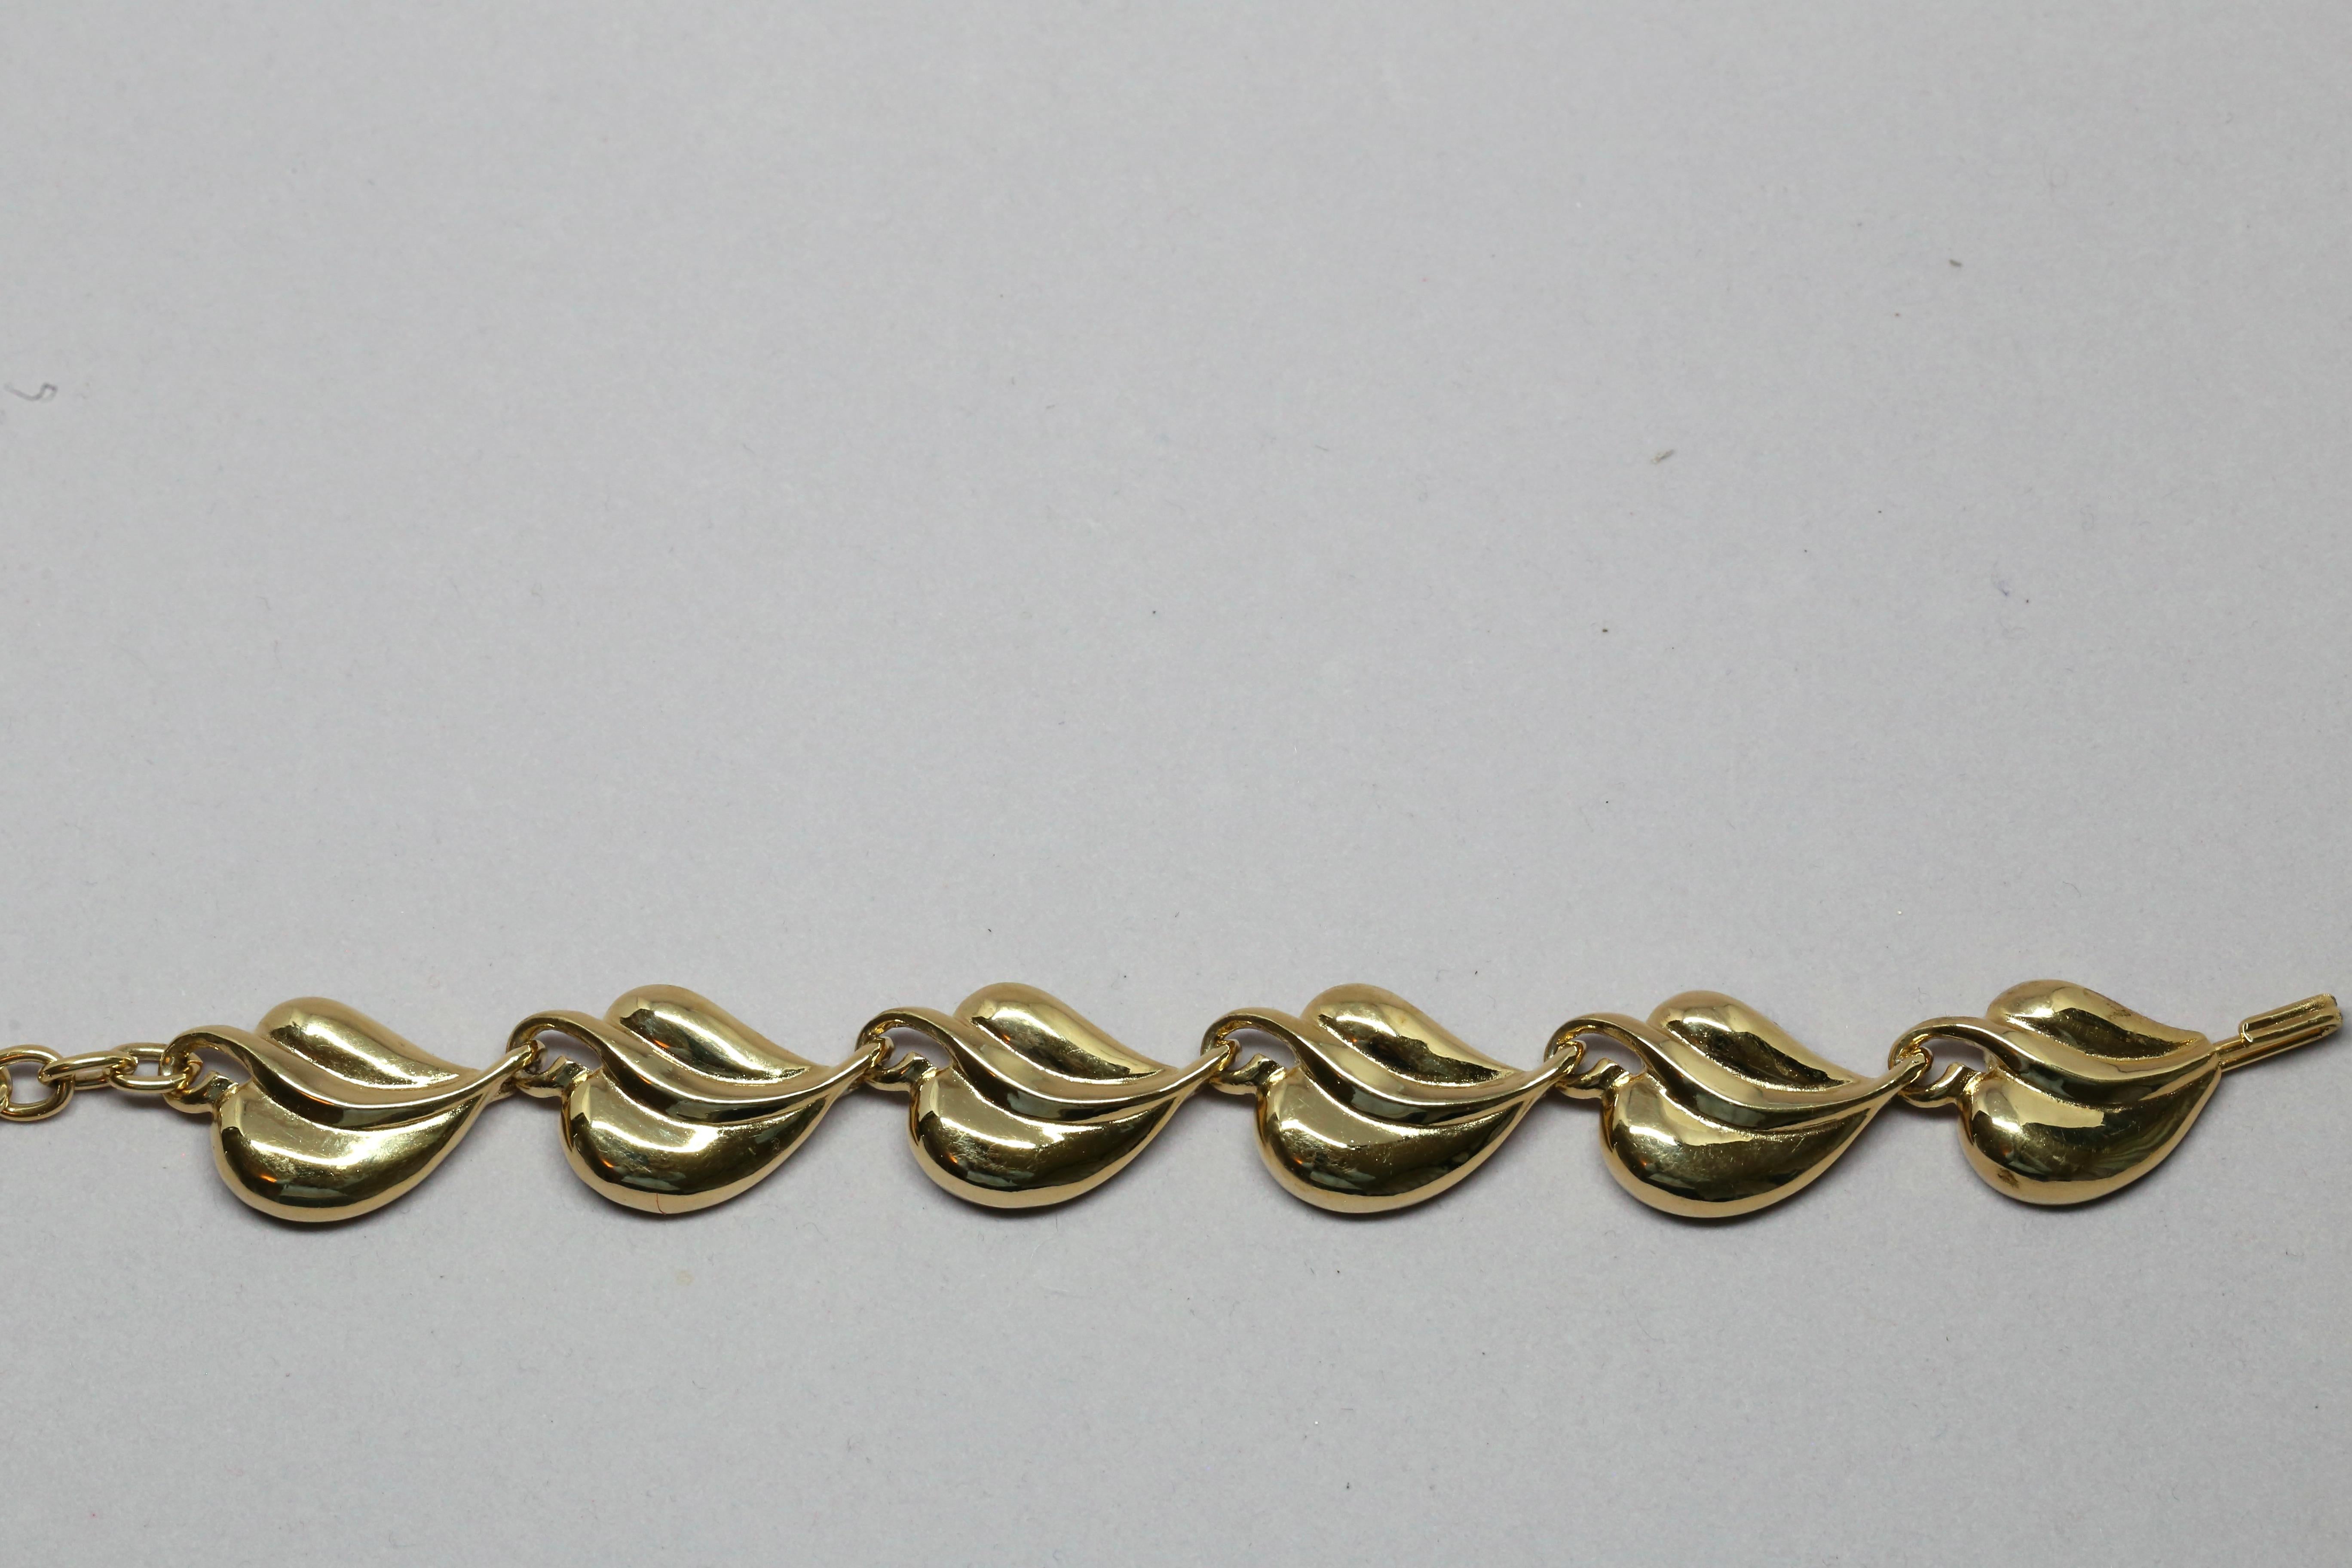 Shiny, leaf-shaped link bracelet from Karl Lagerfeld dating to the 1990's. Approximate measurement: .75